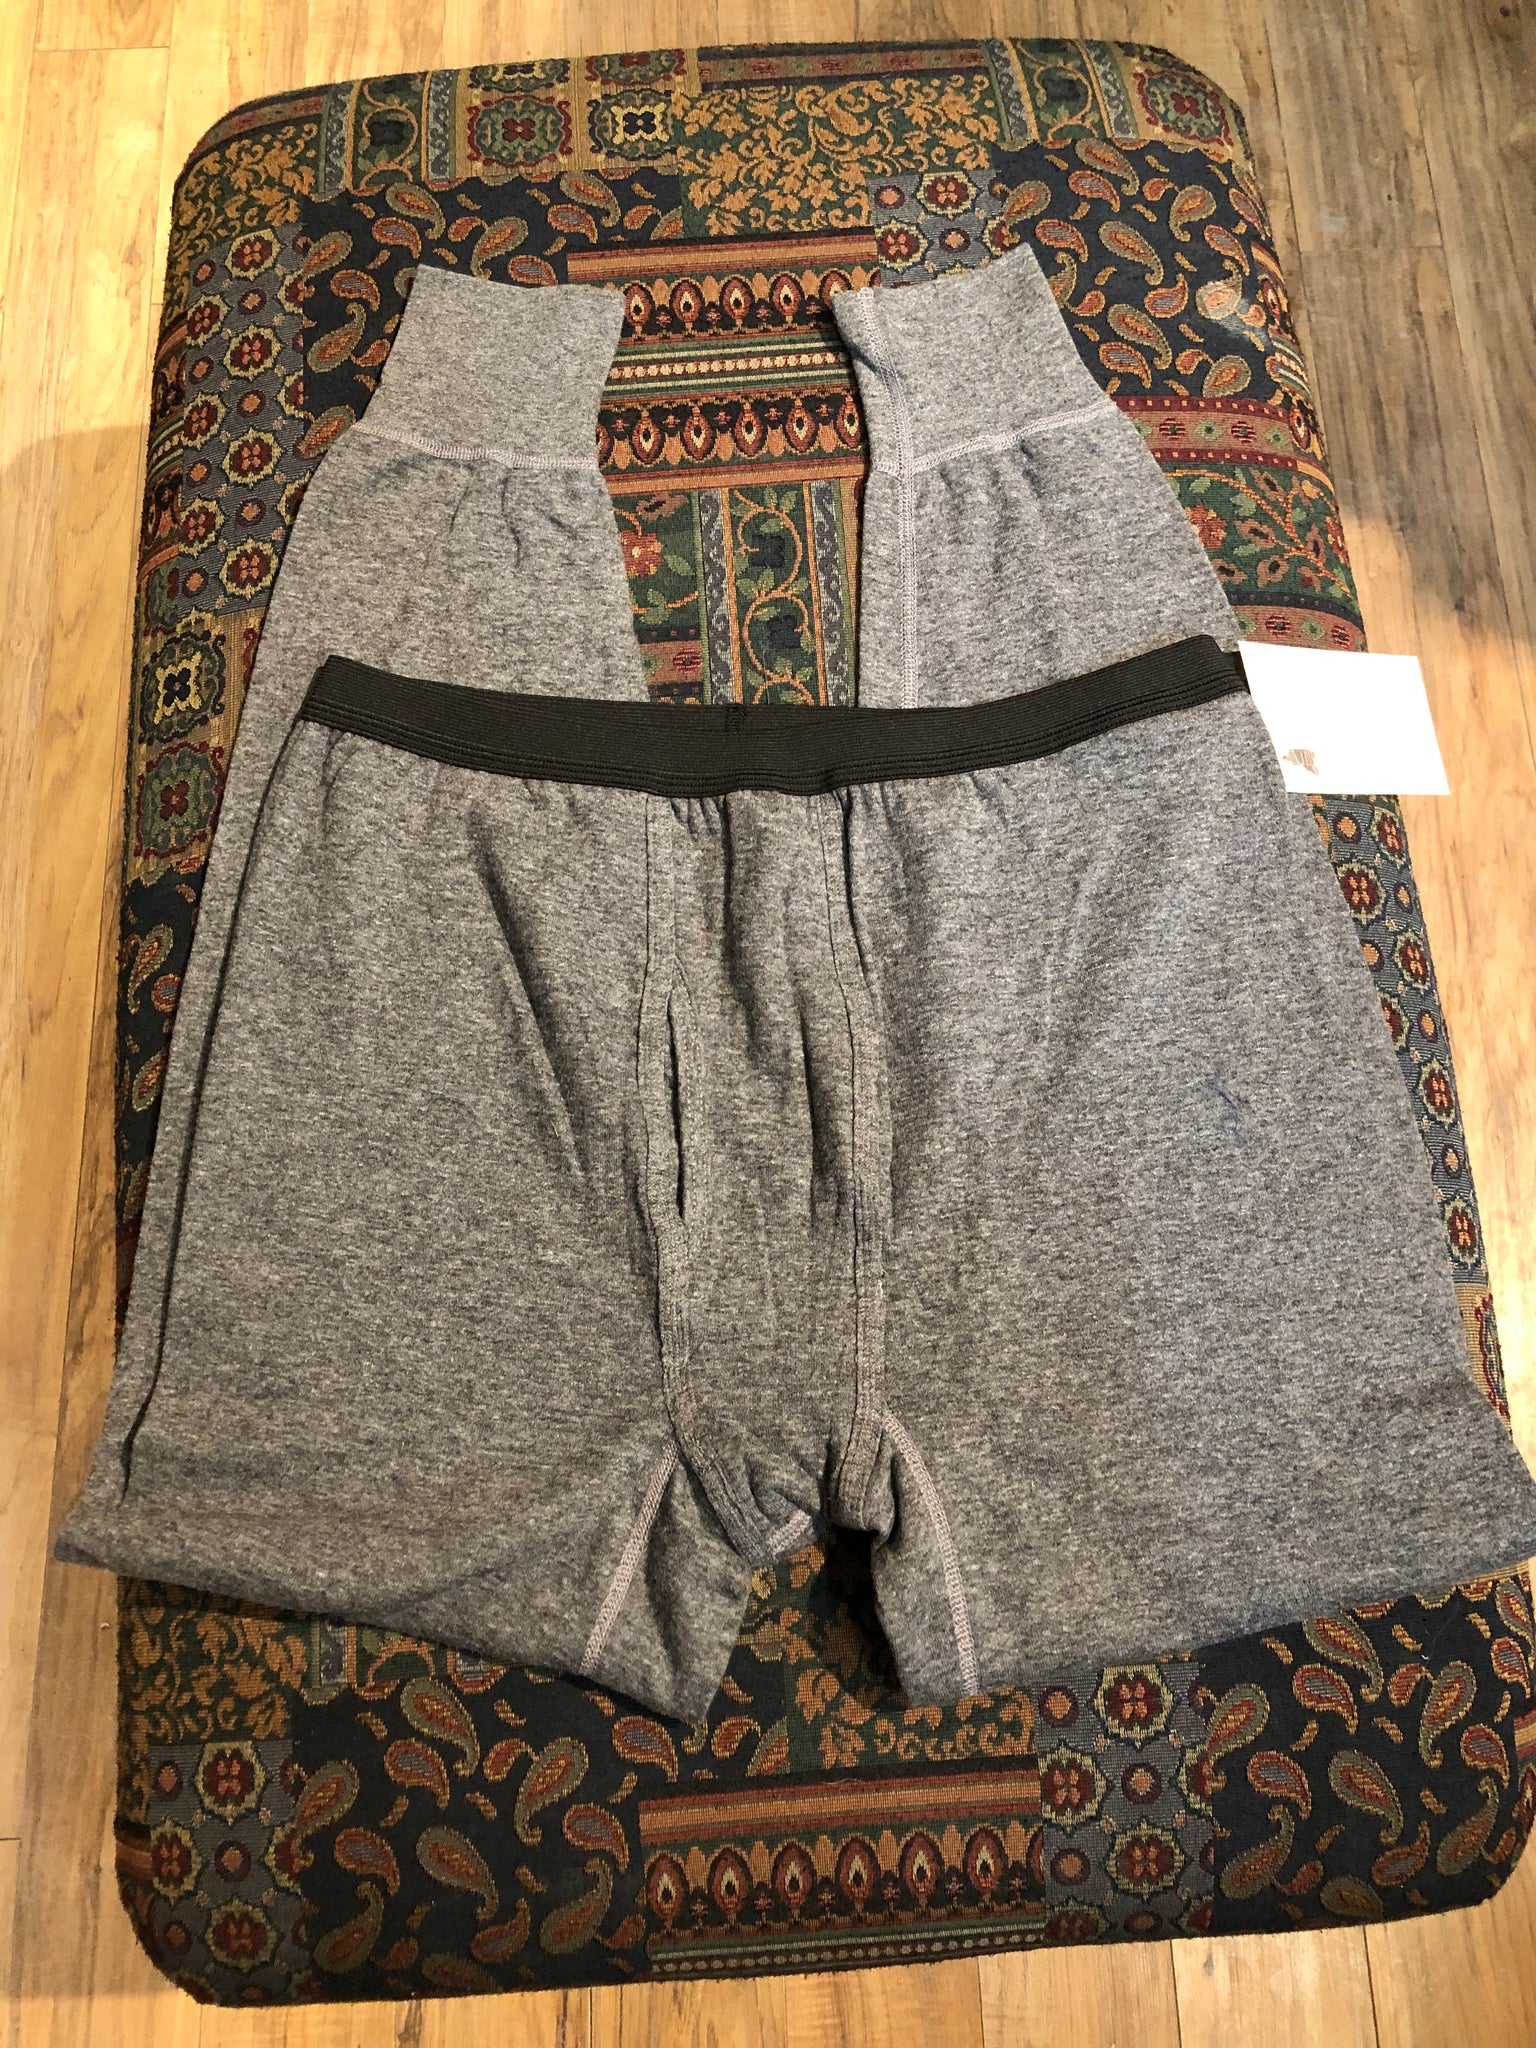 Stanfield's Two Layer Grey Long Underwear, NWOT, Made in Nova